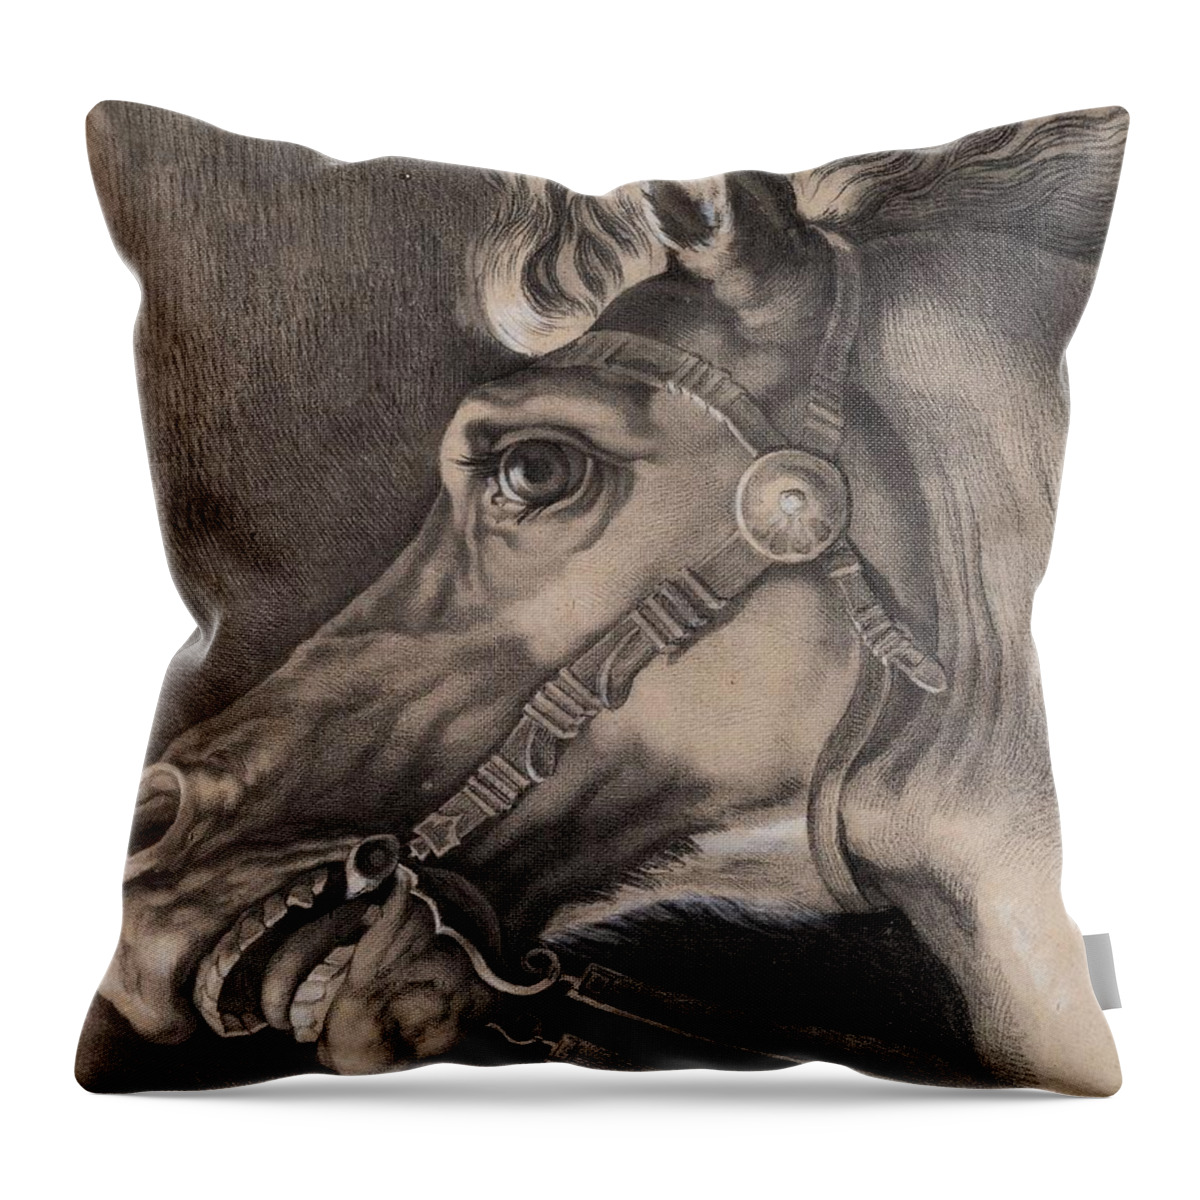 Vincenzo Camuccini (1771-rome-1844) Throw Pillow featuring the painting Horse head by MotionAge Designs